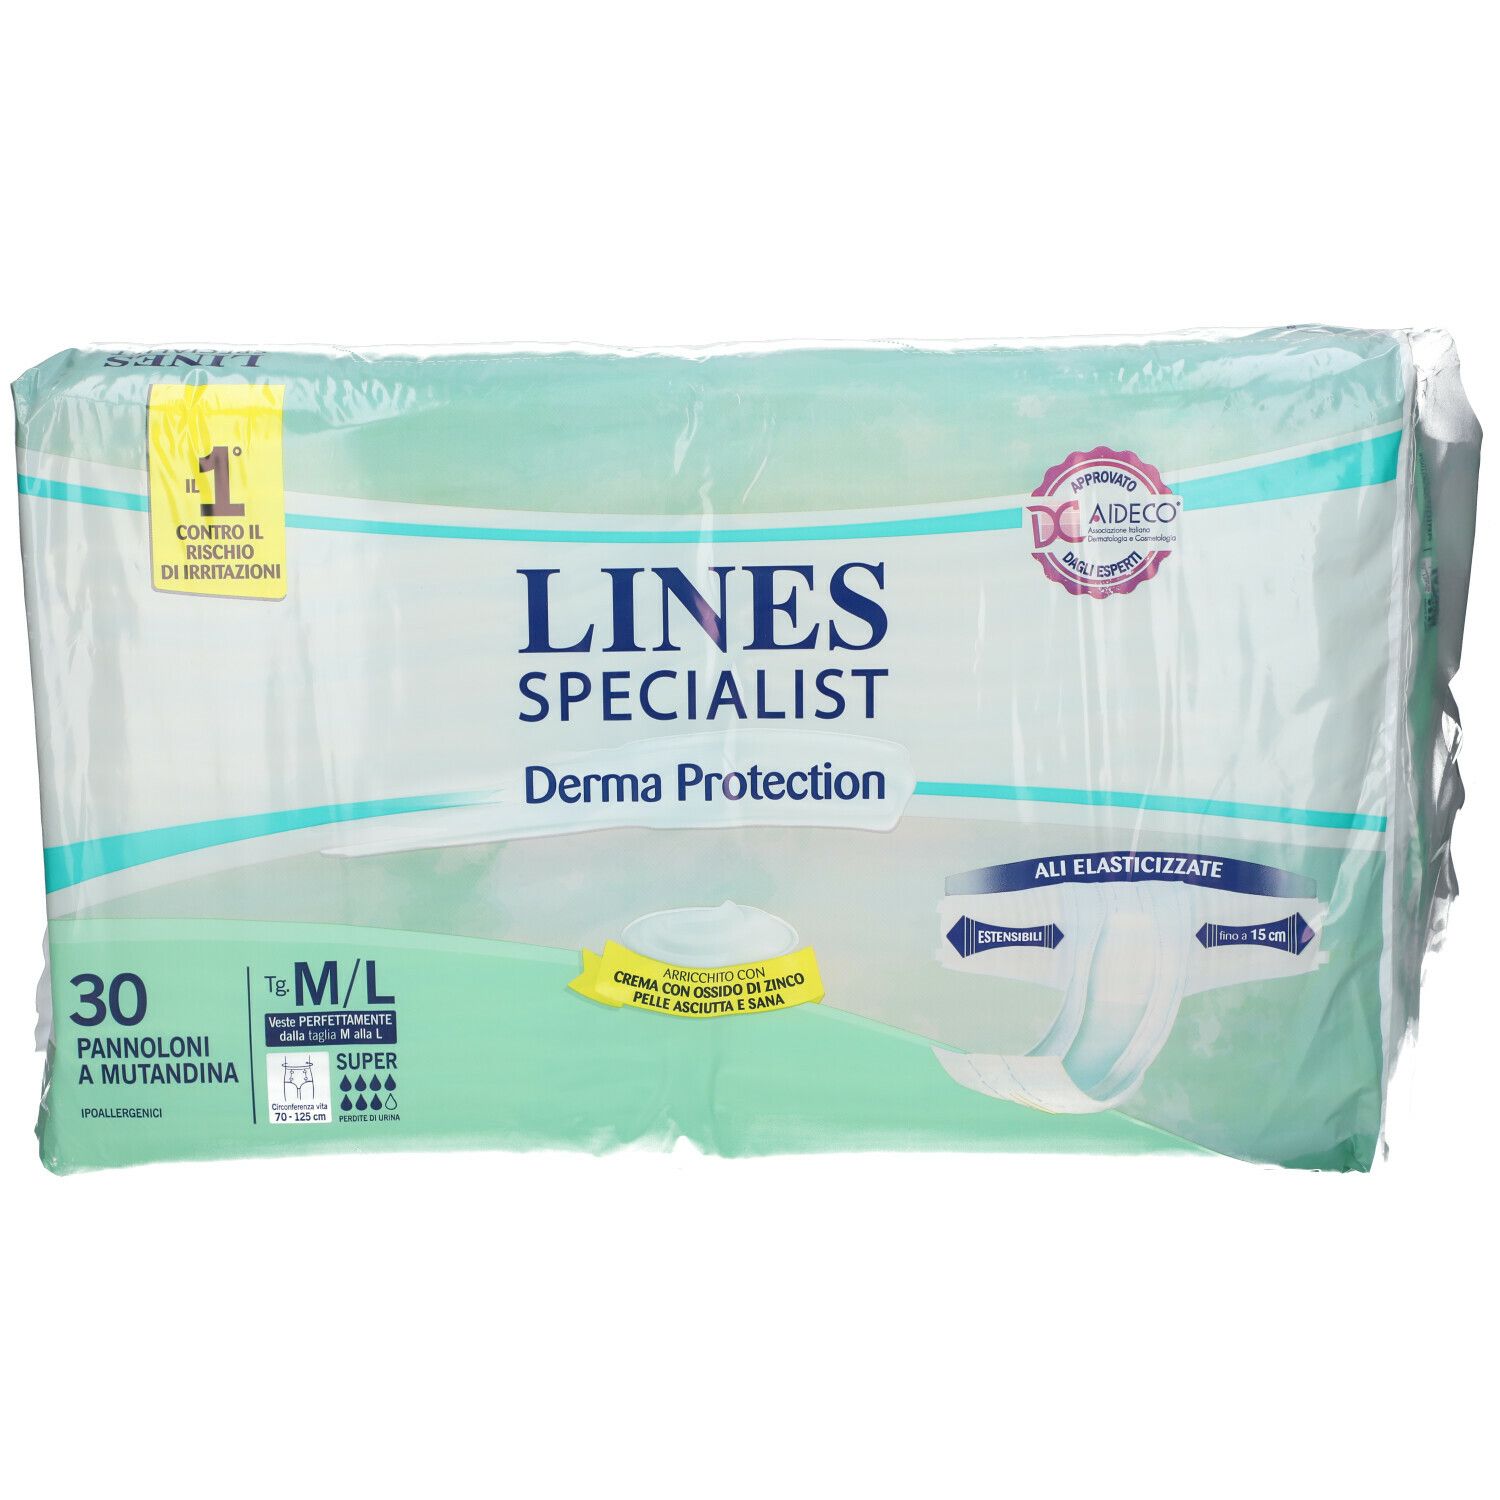 LINES Specialist Derma Protection